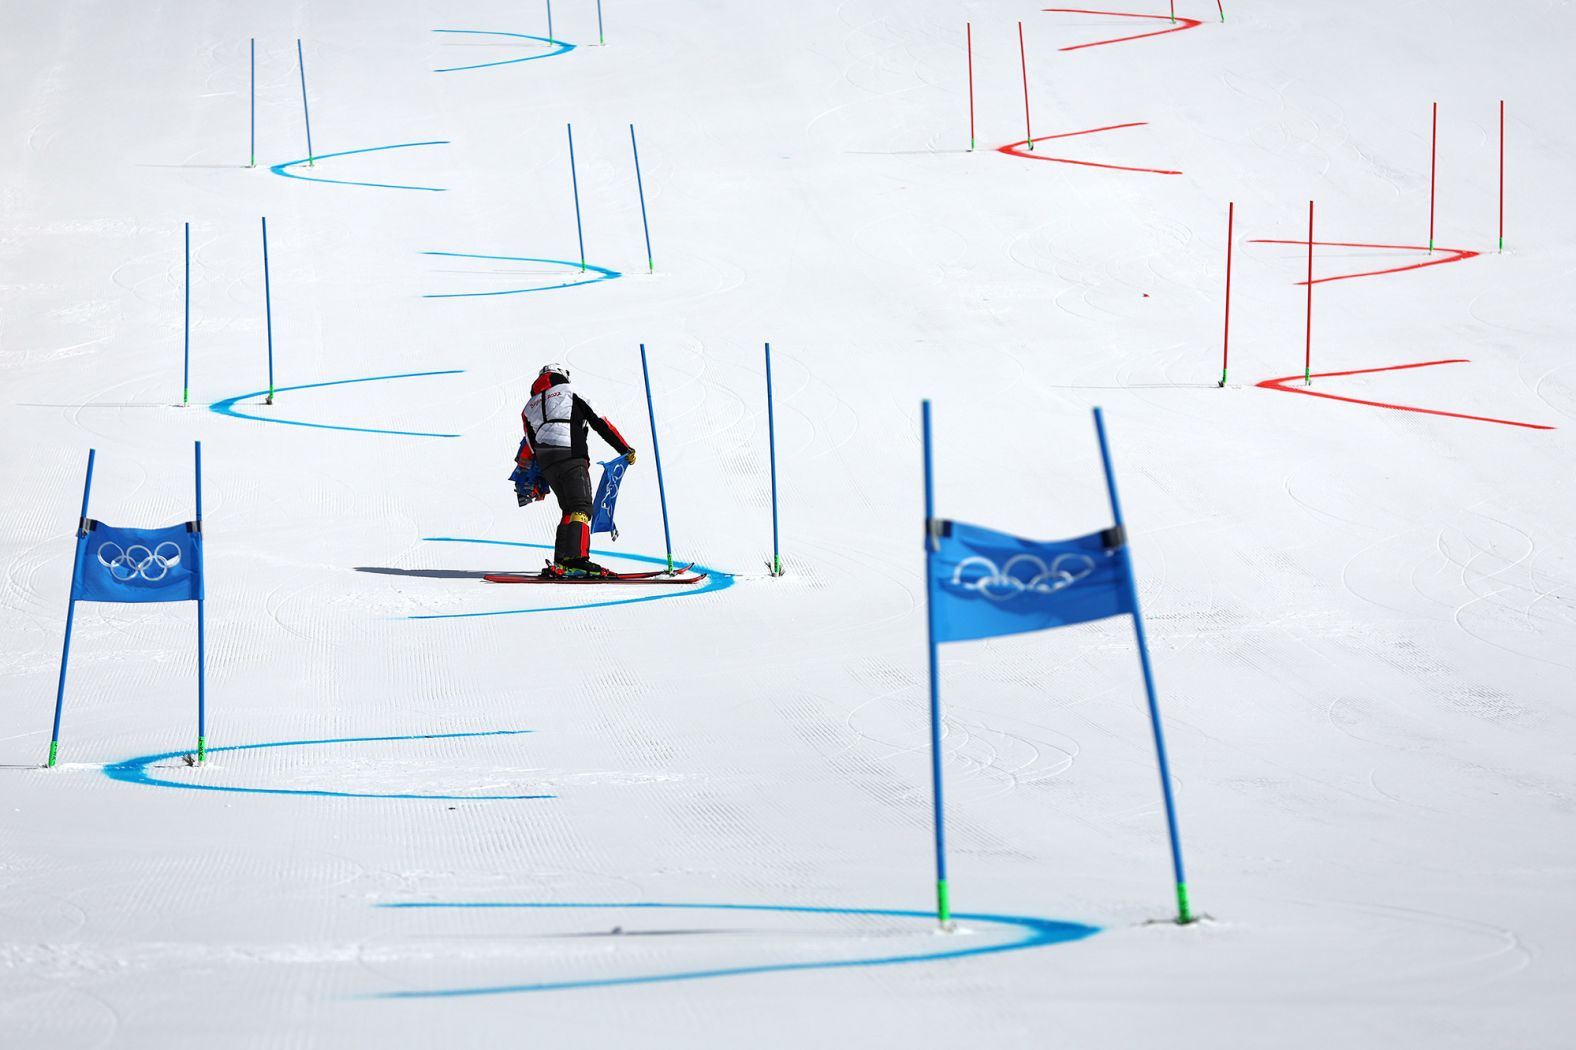 A course worker removes gate flags after the alpine skiing mixed team event was <a href="index.php?page=&url=https%3A%2F%2Fwww.cnn.com%2Fworld%2Flive-news%2Fbeijing-winter-olympics-02-19-22-spt%2Fh_898007b8fba0b1cf63ca478972584e50" target="_blank">postponed due to poor weather conditions</a> on February 19.